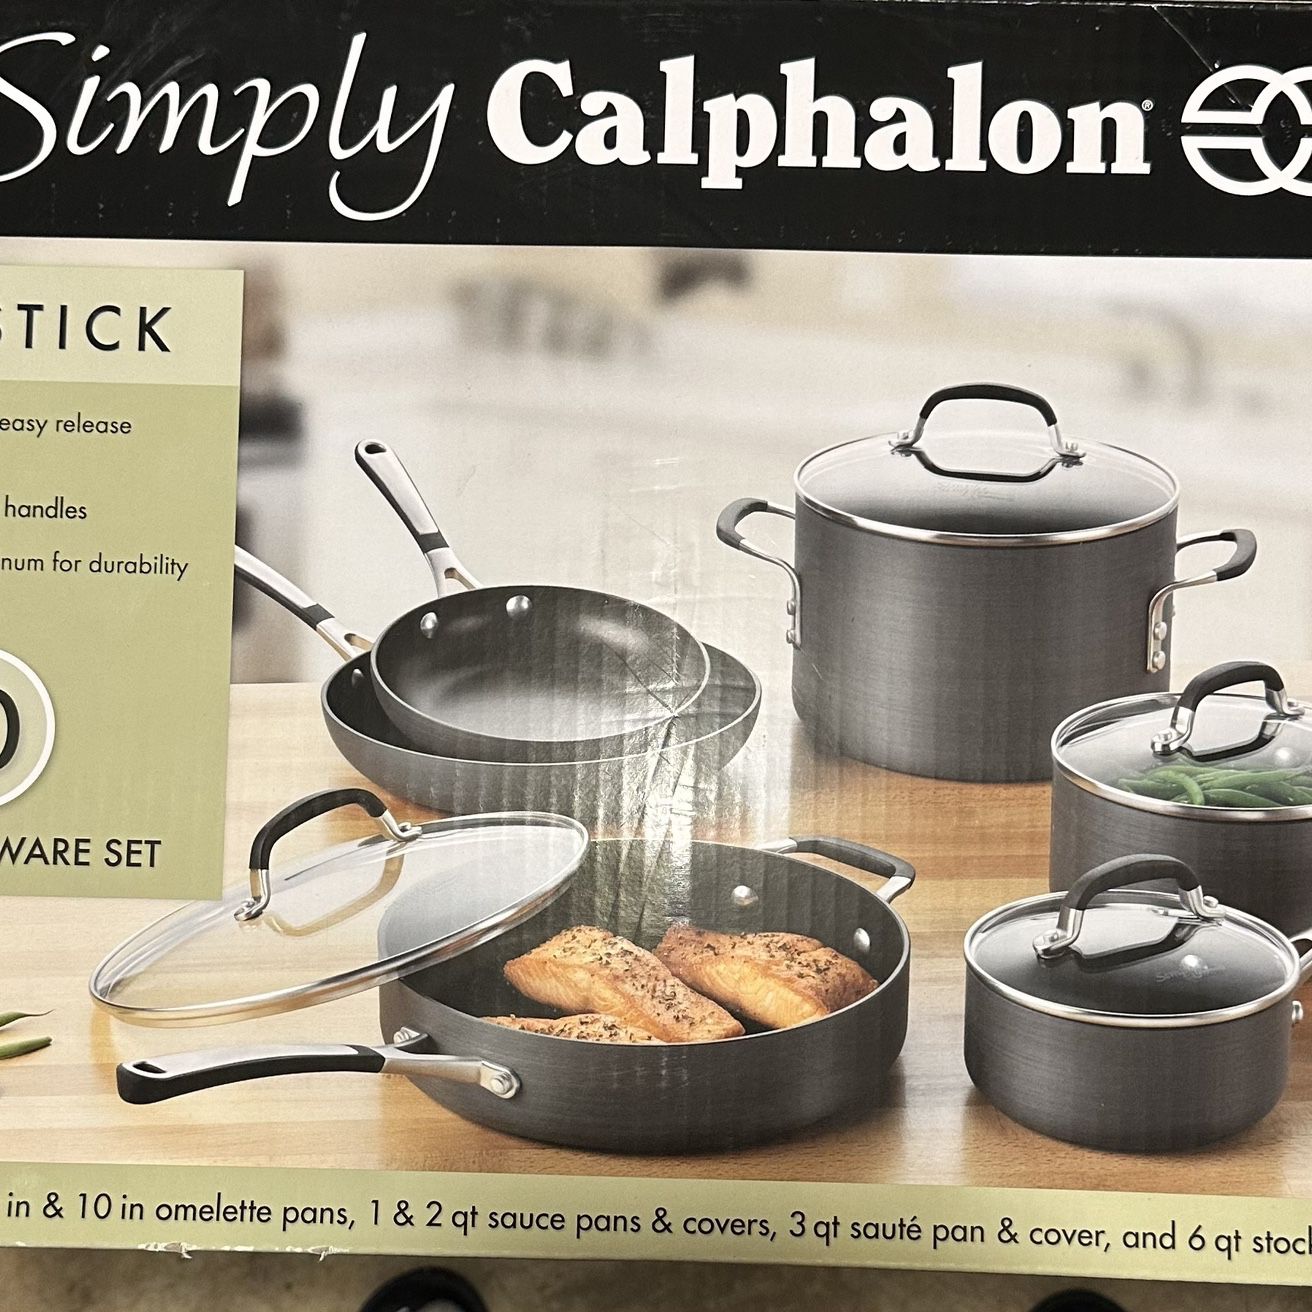 Calphalon Hard Anodized Nonstick Cookware Set for Sale in Chicago